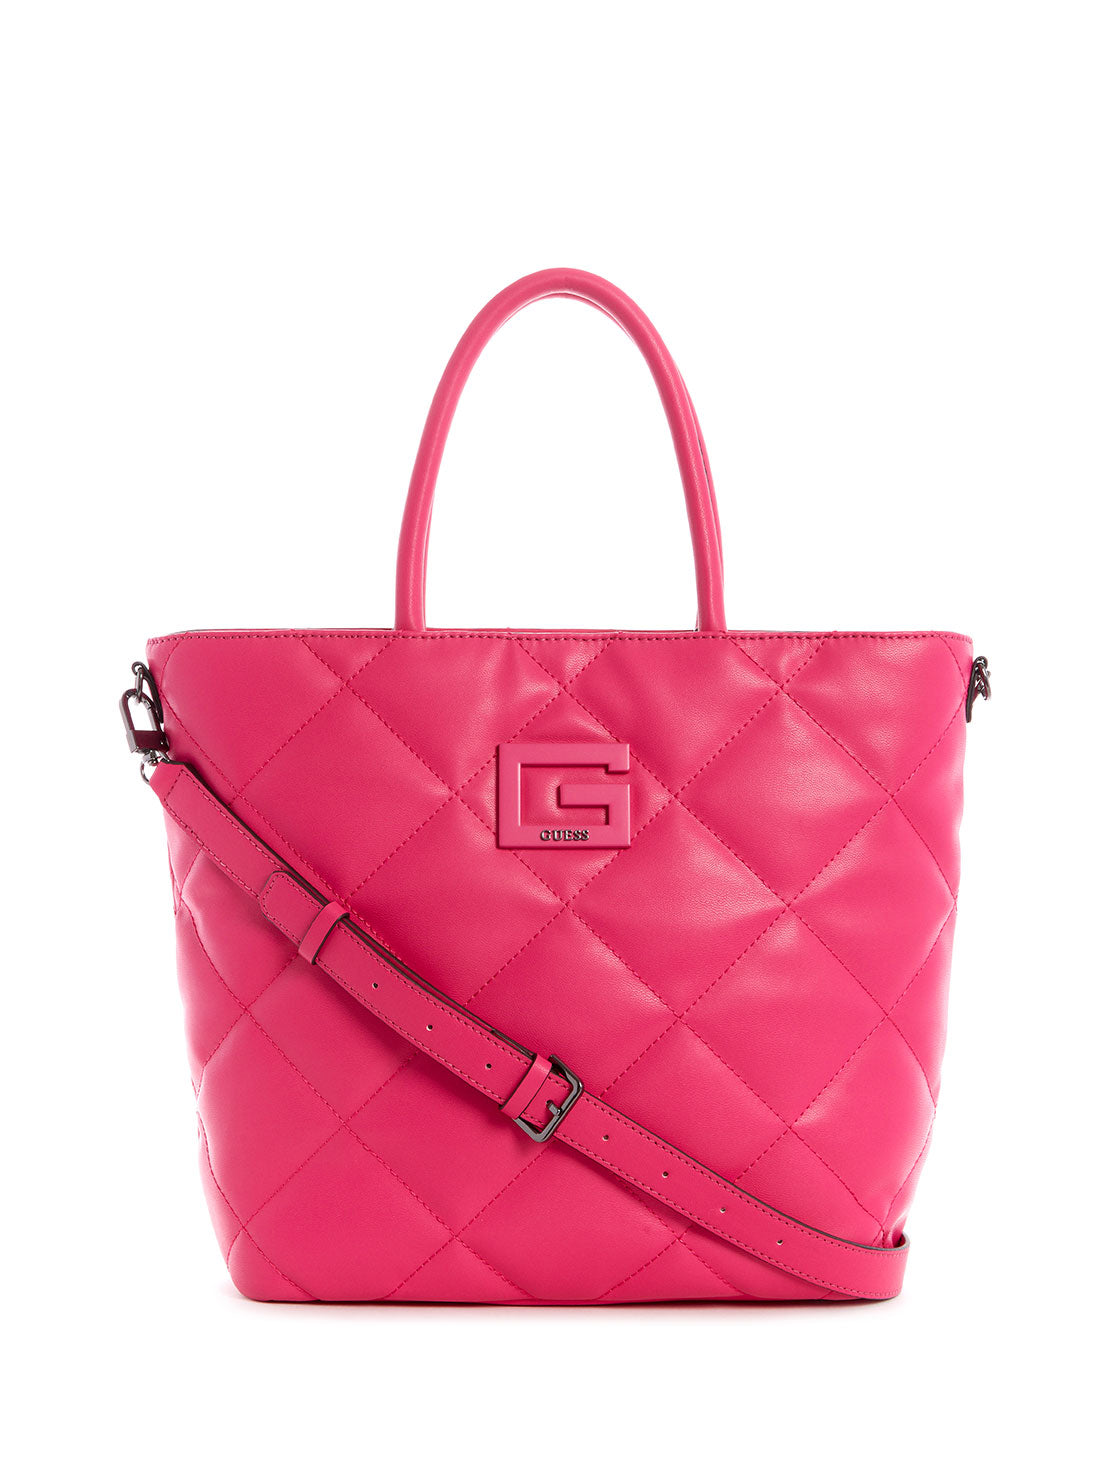 GUESS Womens Hot Pink Quilted Brightside Tote Bag QM758023 Front View